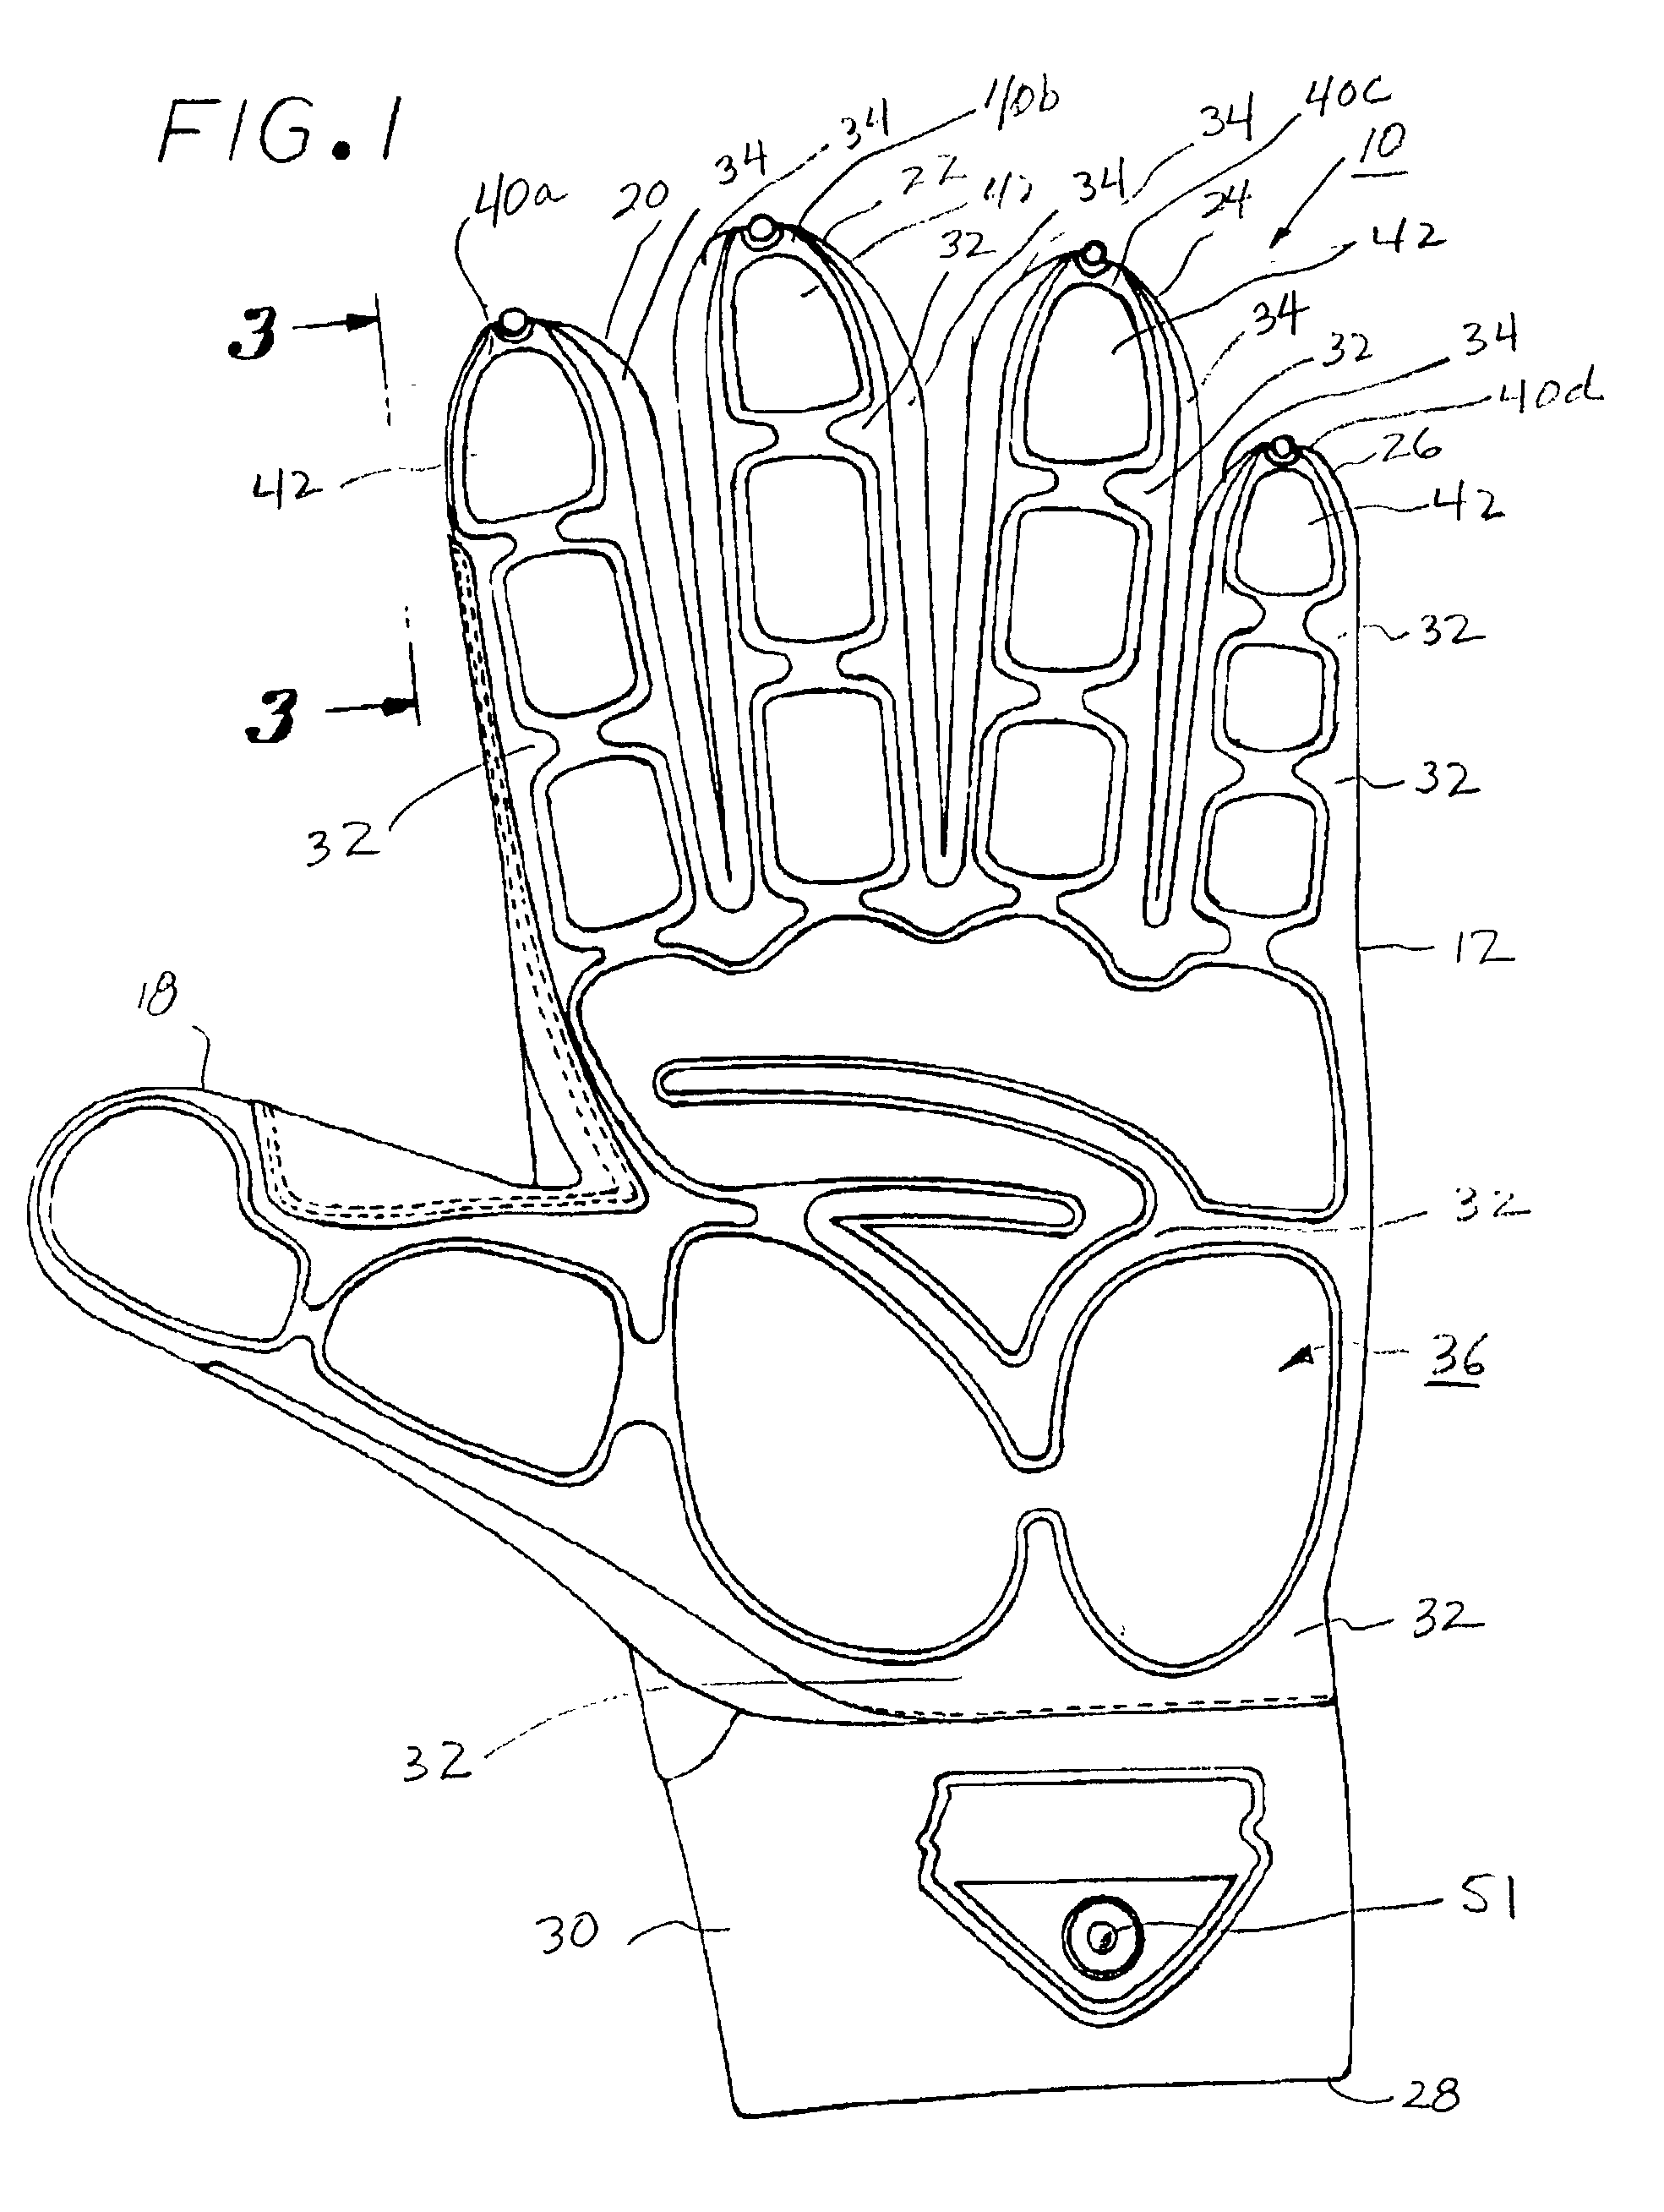 Glove having molded rubber palm pattern with a portion that rolls over fingertips